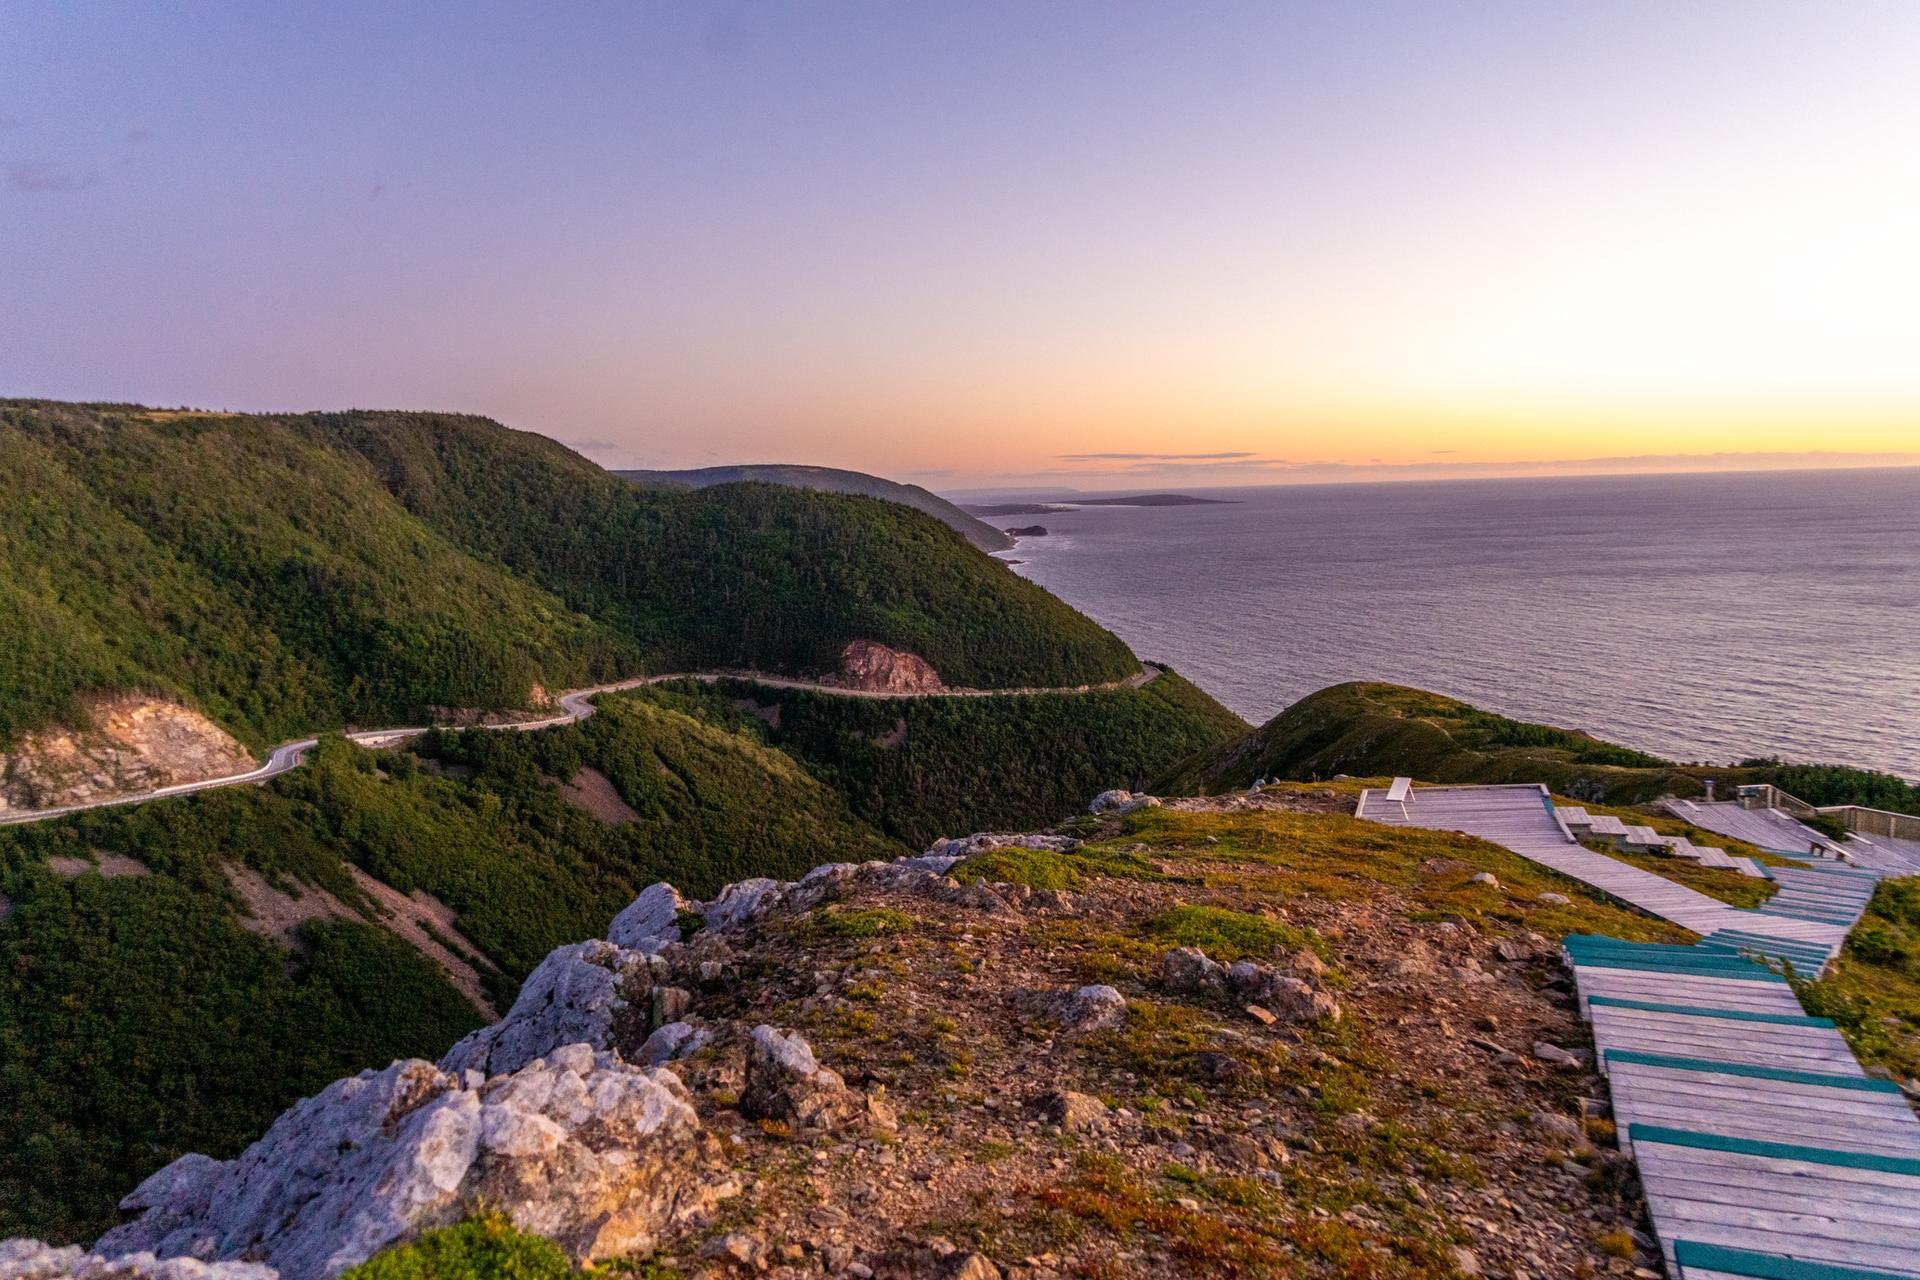 The Skyline Trail overlooking the water n Cape Breton Highlands National Park